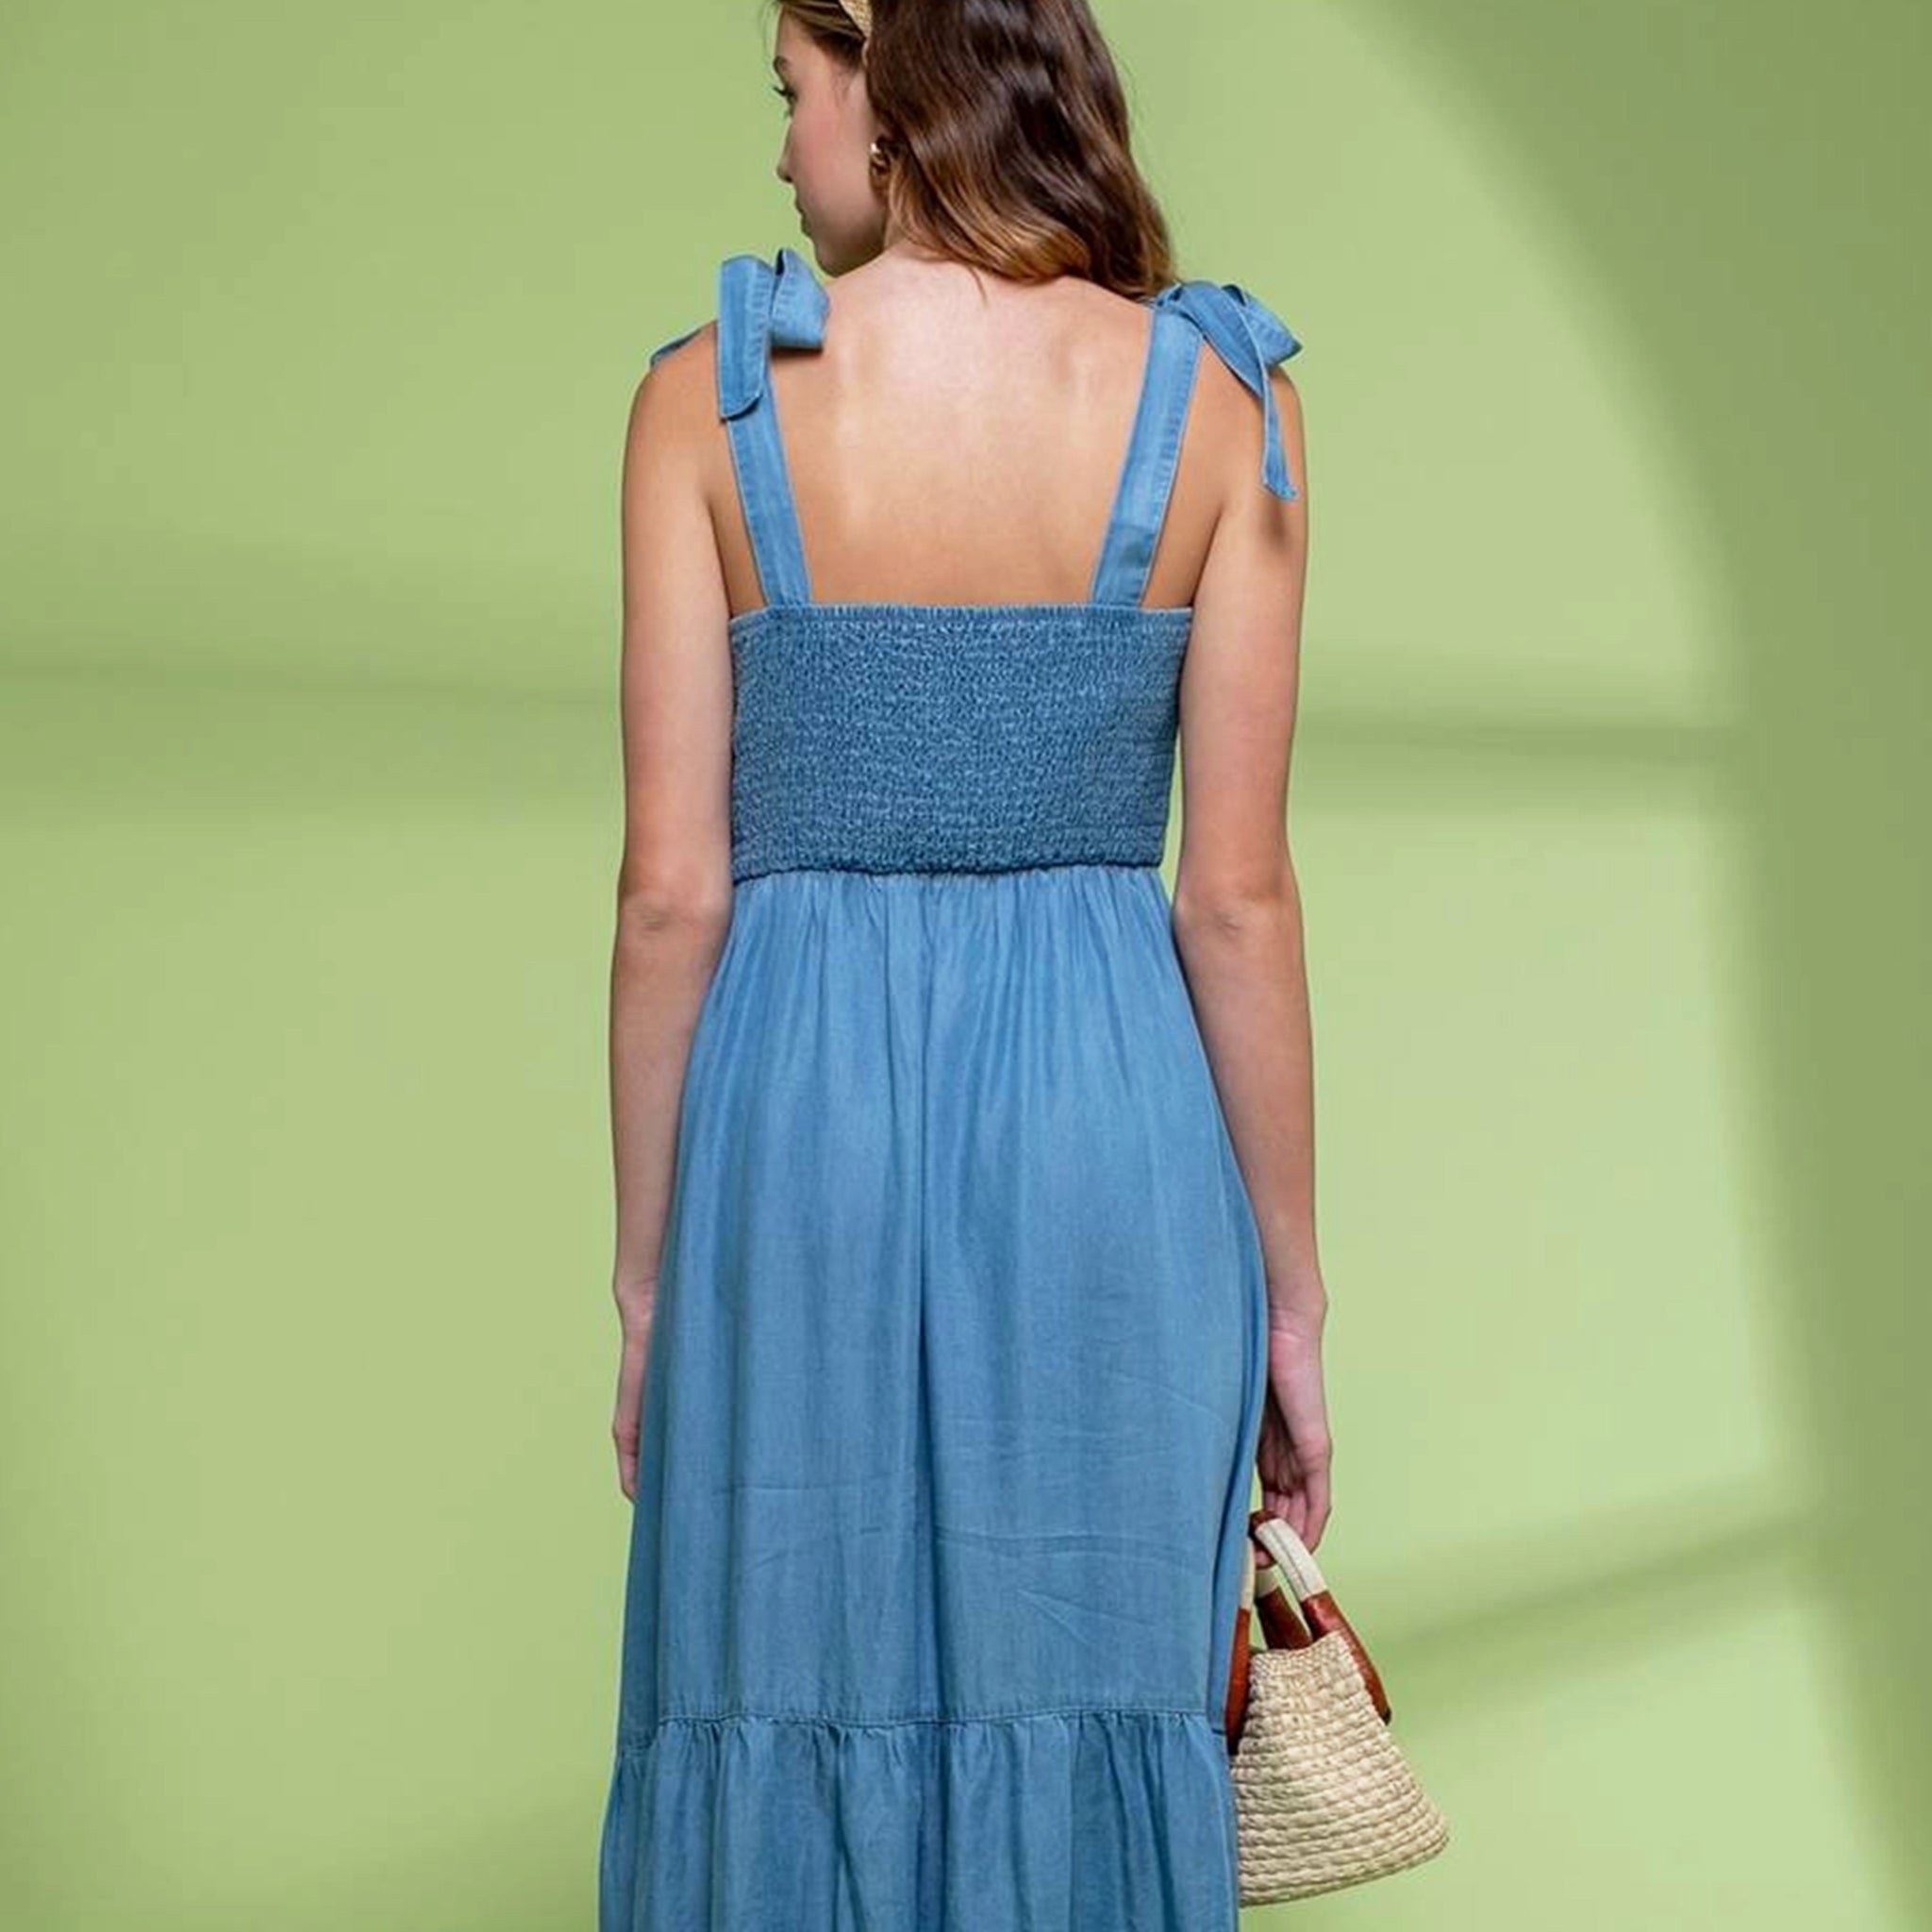 On a green shadow background is a model wearing a blue flowy midi dress with tie shoulder straps and a square neckline.